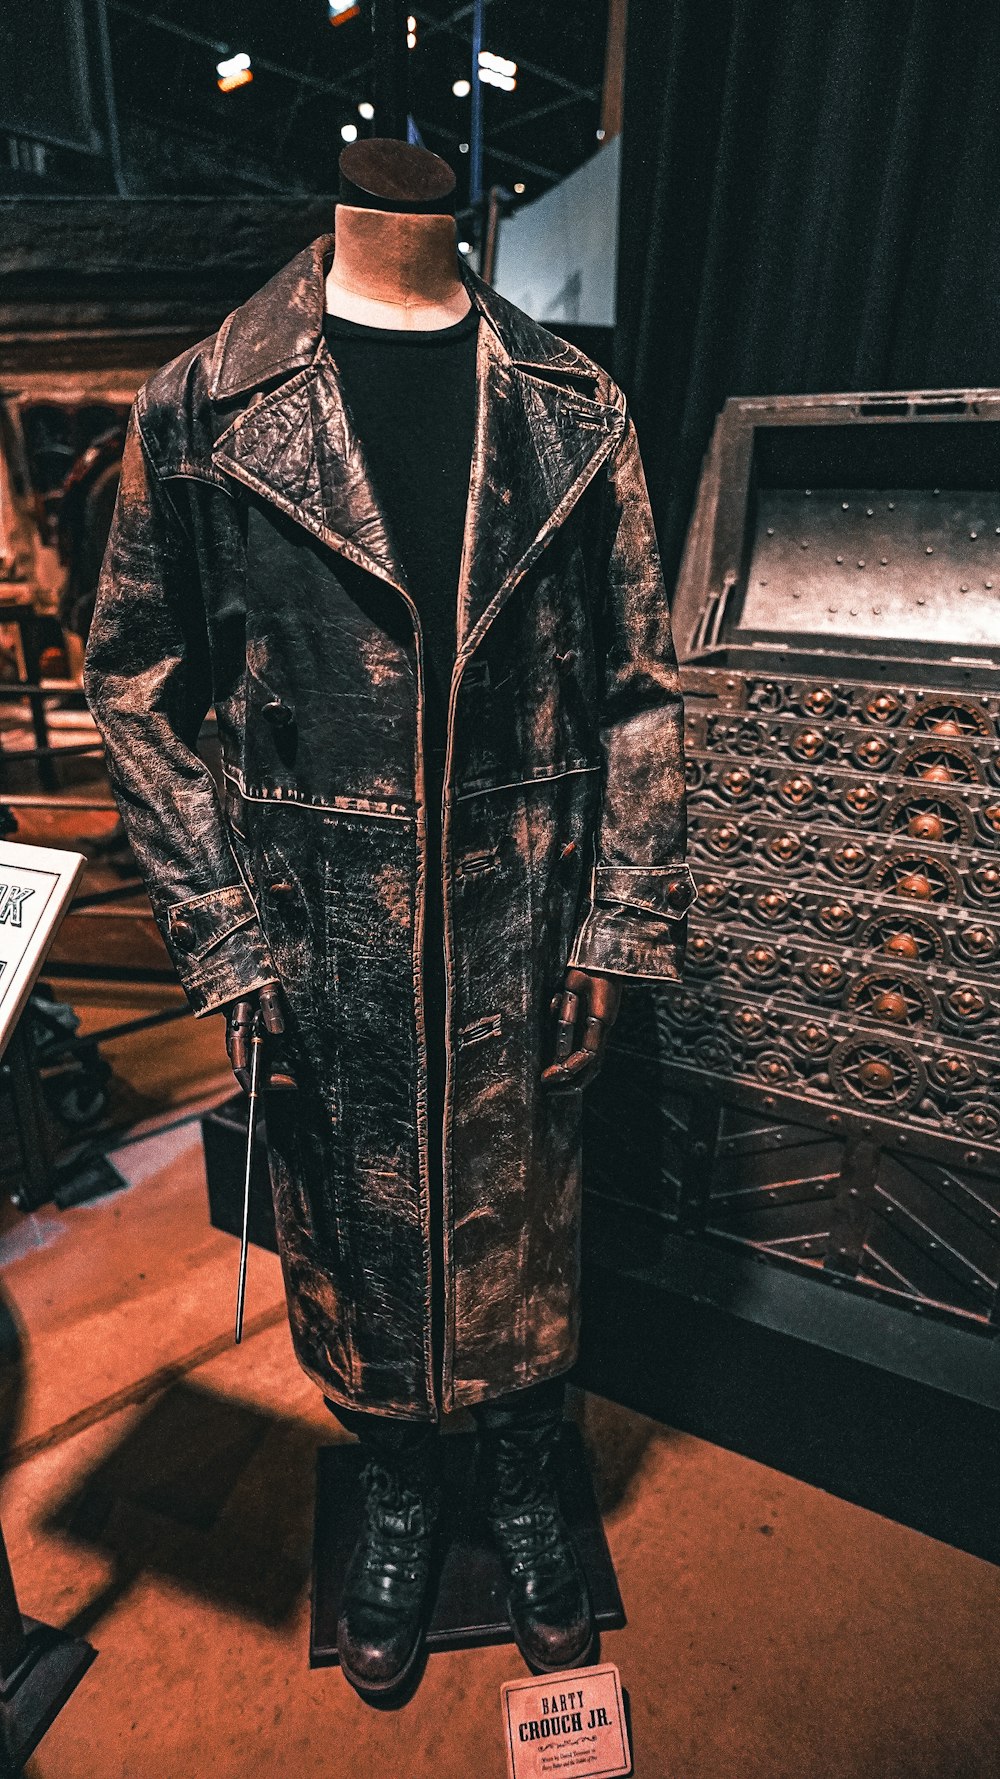 a leather coat on display in a museum